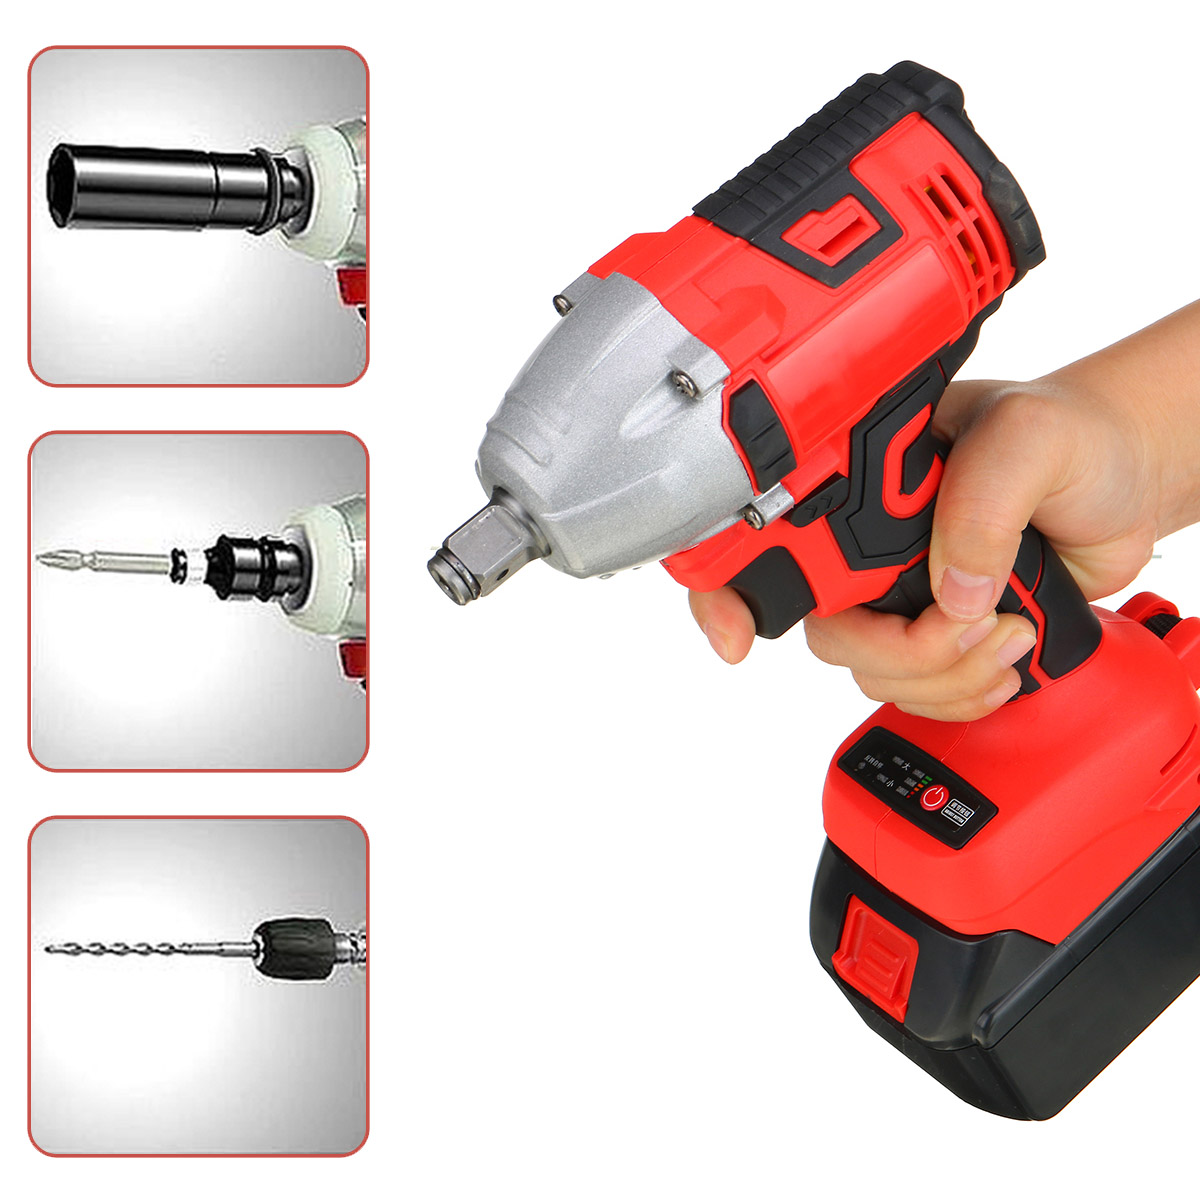 330NM-3000RPM-Electric-Cordless-Brushless-Impact-Wrench-W-1-or-2pcs-Battery--5pcs-Sockets-1831583-5